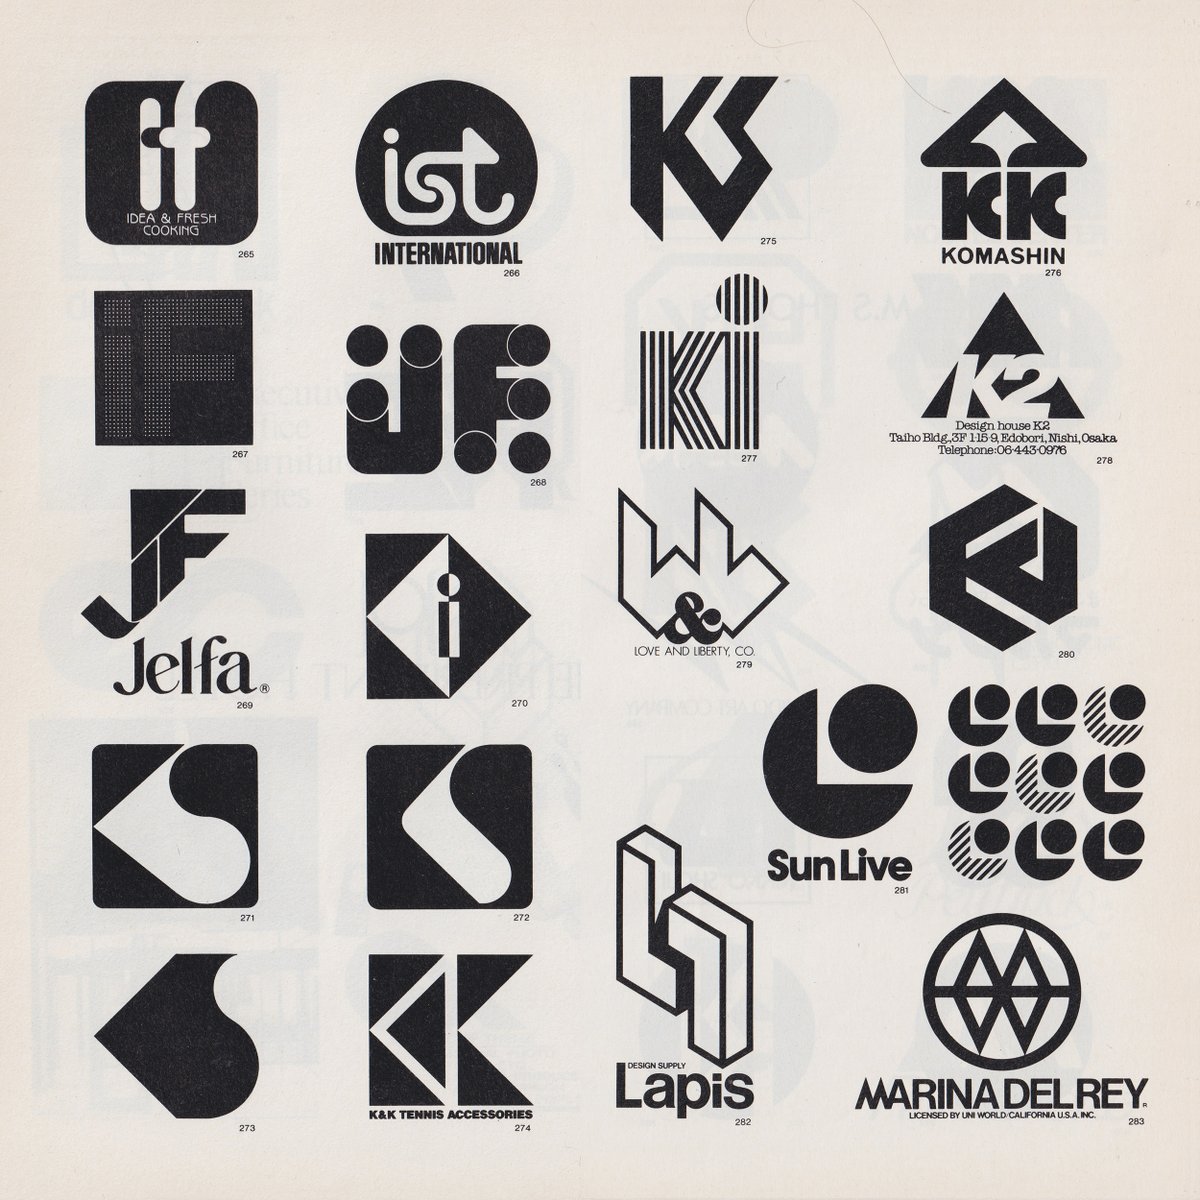 A selection from the book Trademarks, Symbolmarks & Logotypes 1980-81 Volume.

Discover thousands more modernist logos at logo-archive.org

#logos #design #branding #logodesign #design #designinspiration